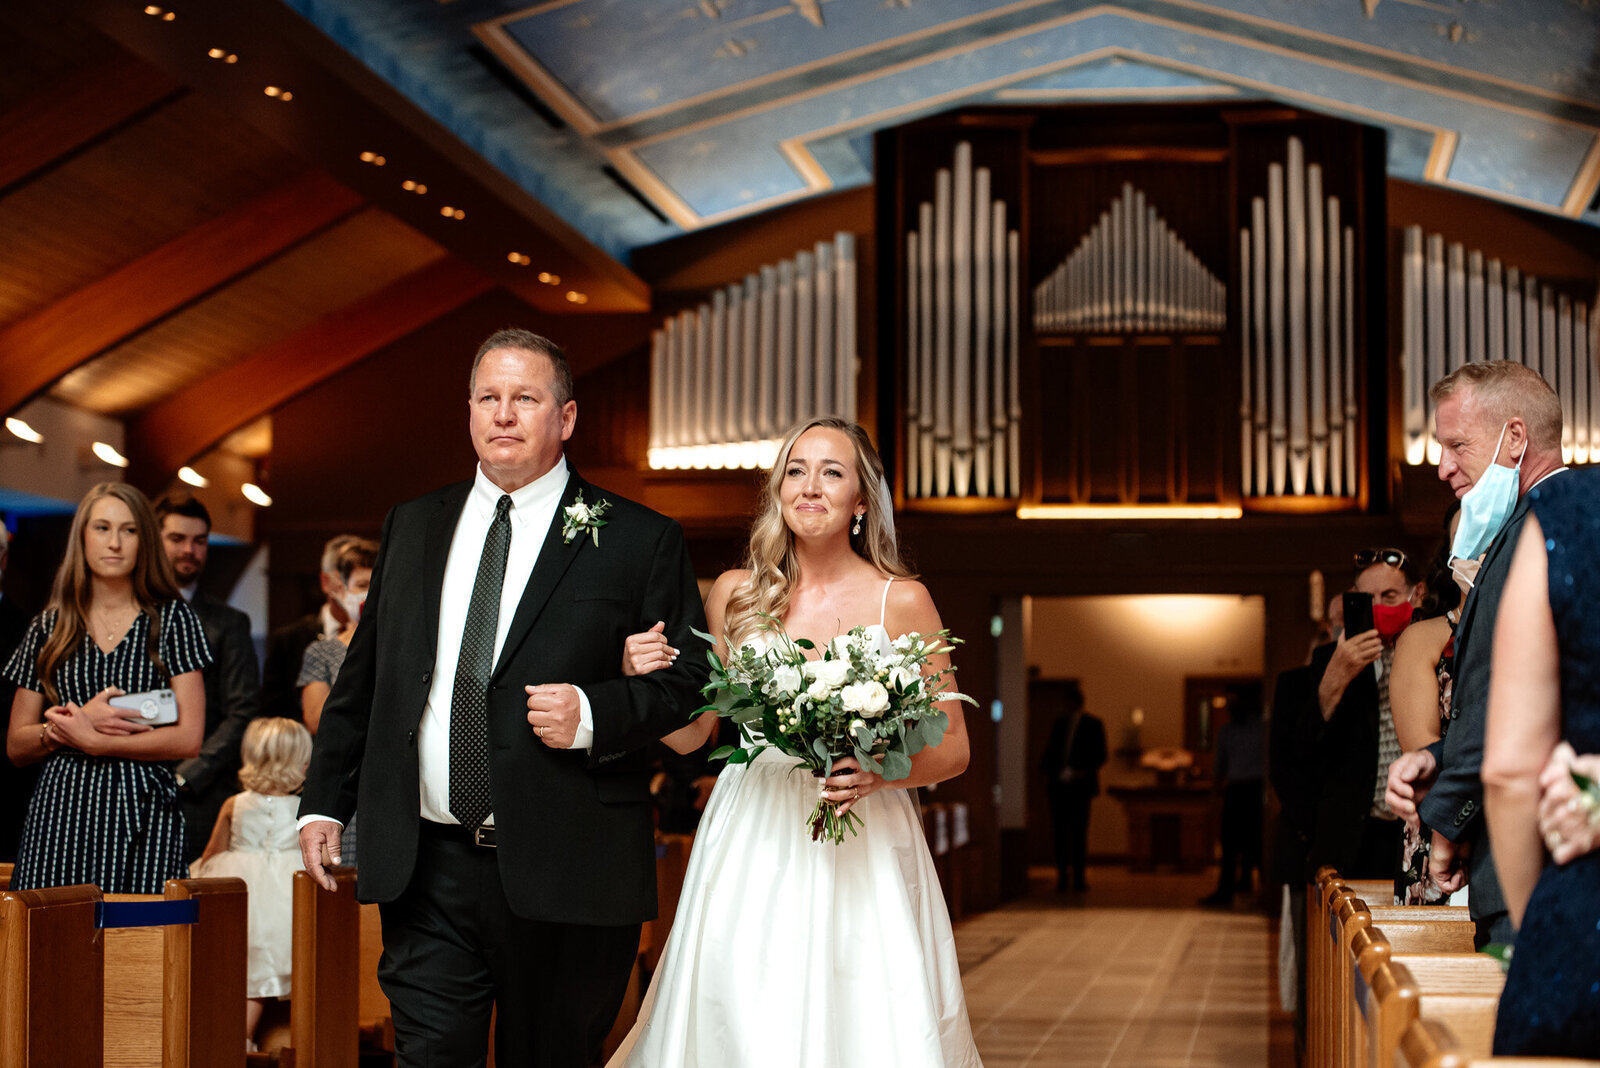 cathedral style wedding with the bride being walked down the aisle by her dad